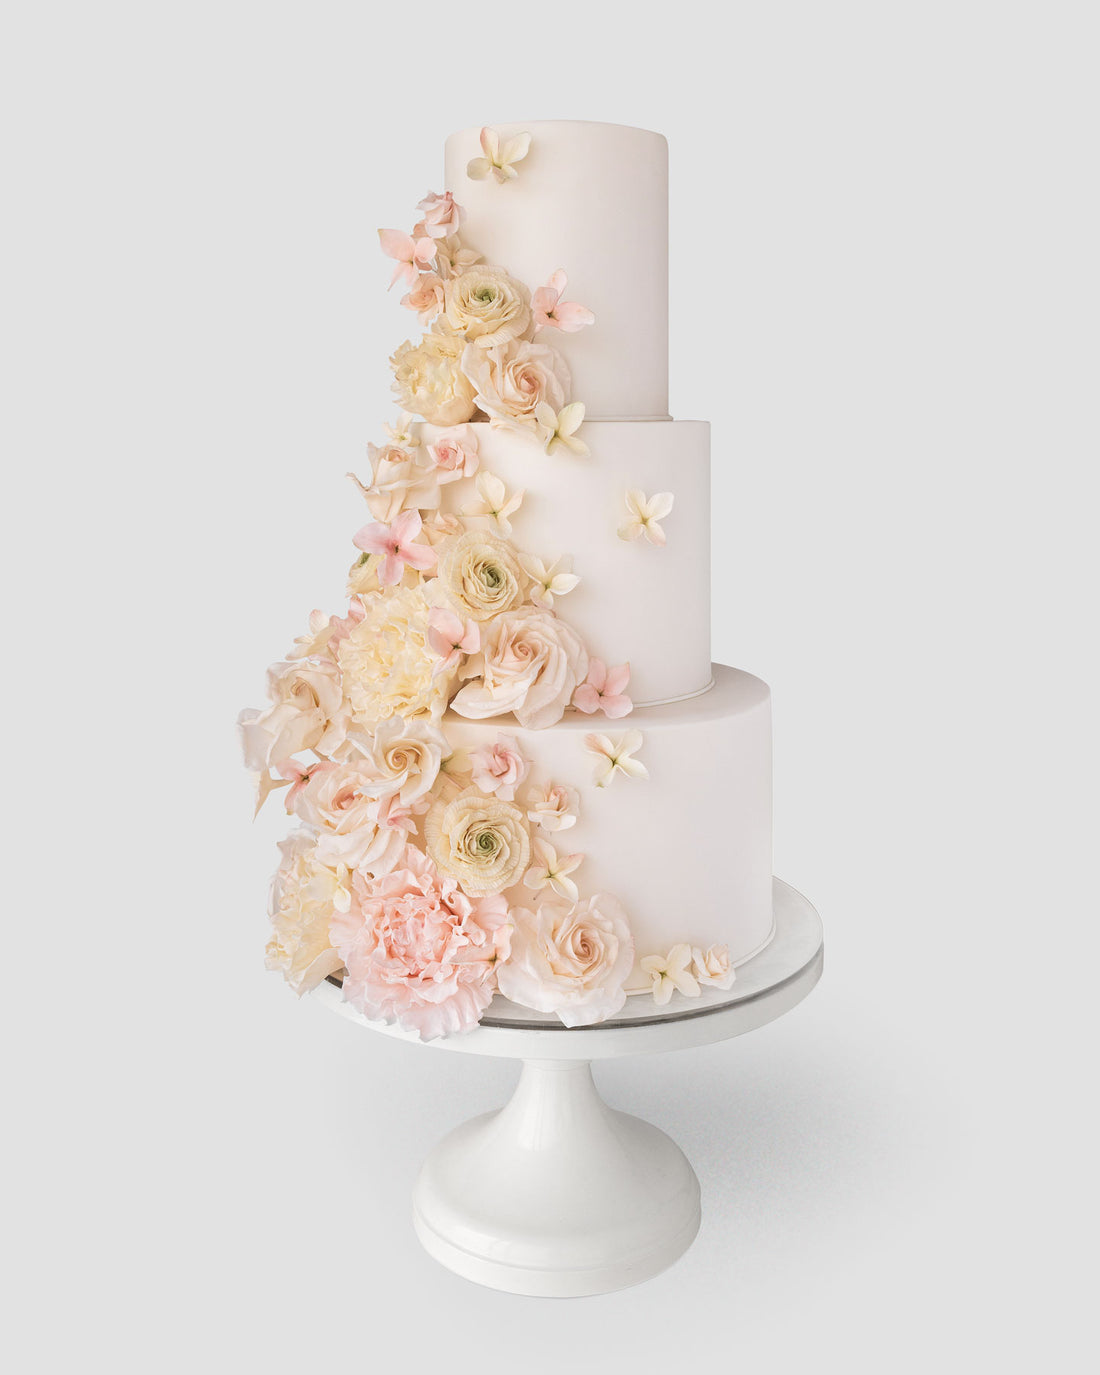 20 Wedding Cakes for Your Big Day | Maggie Sottero